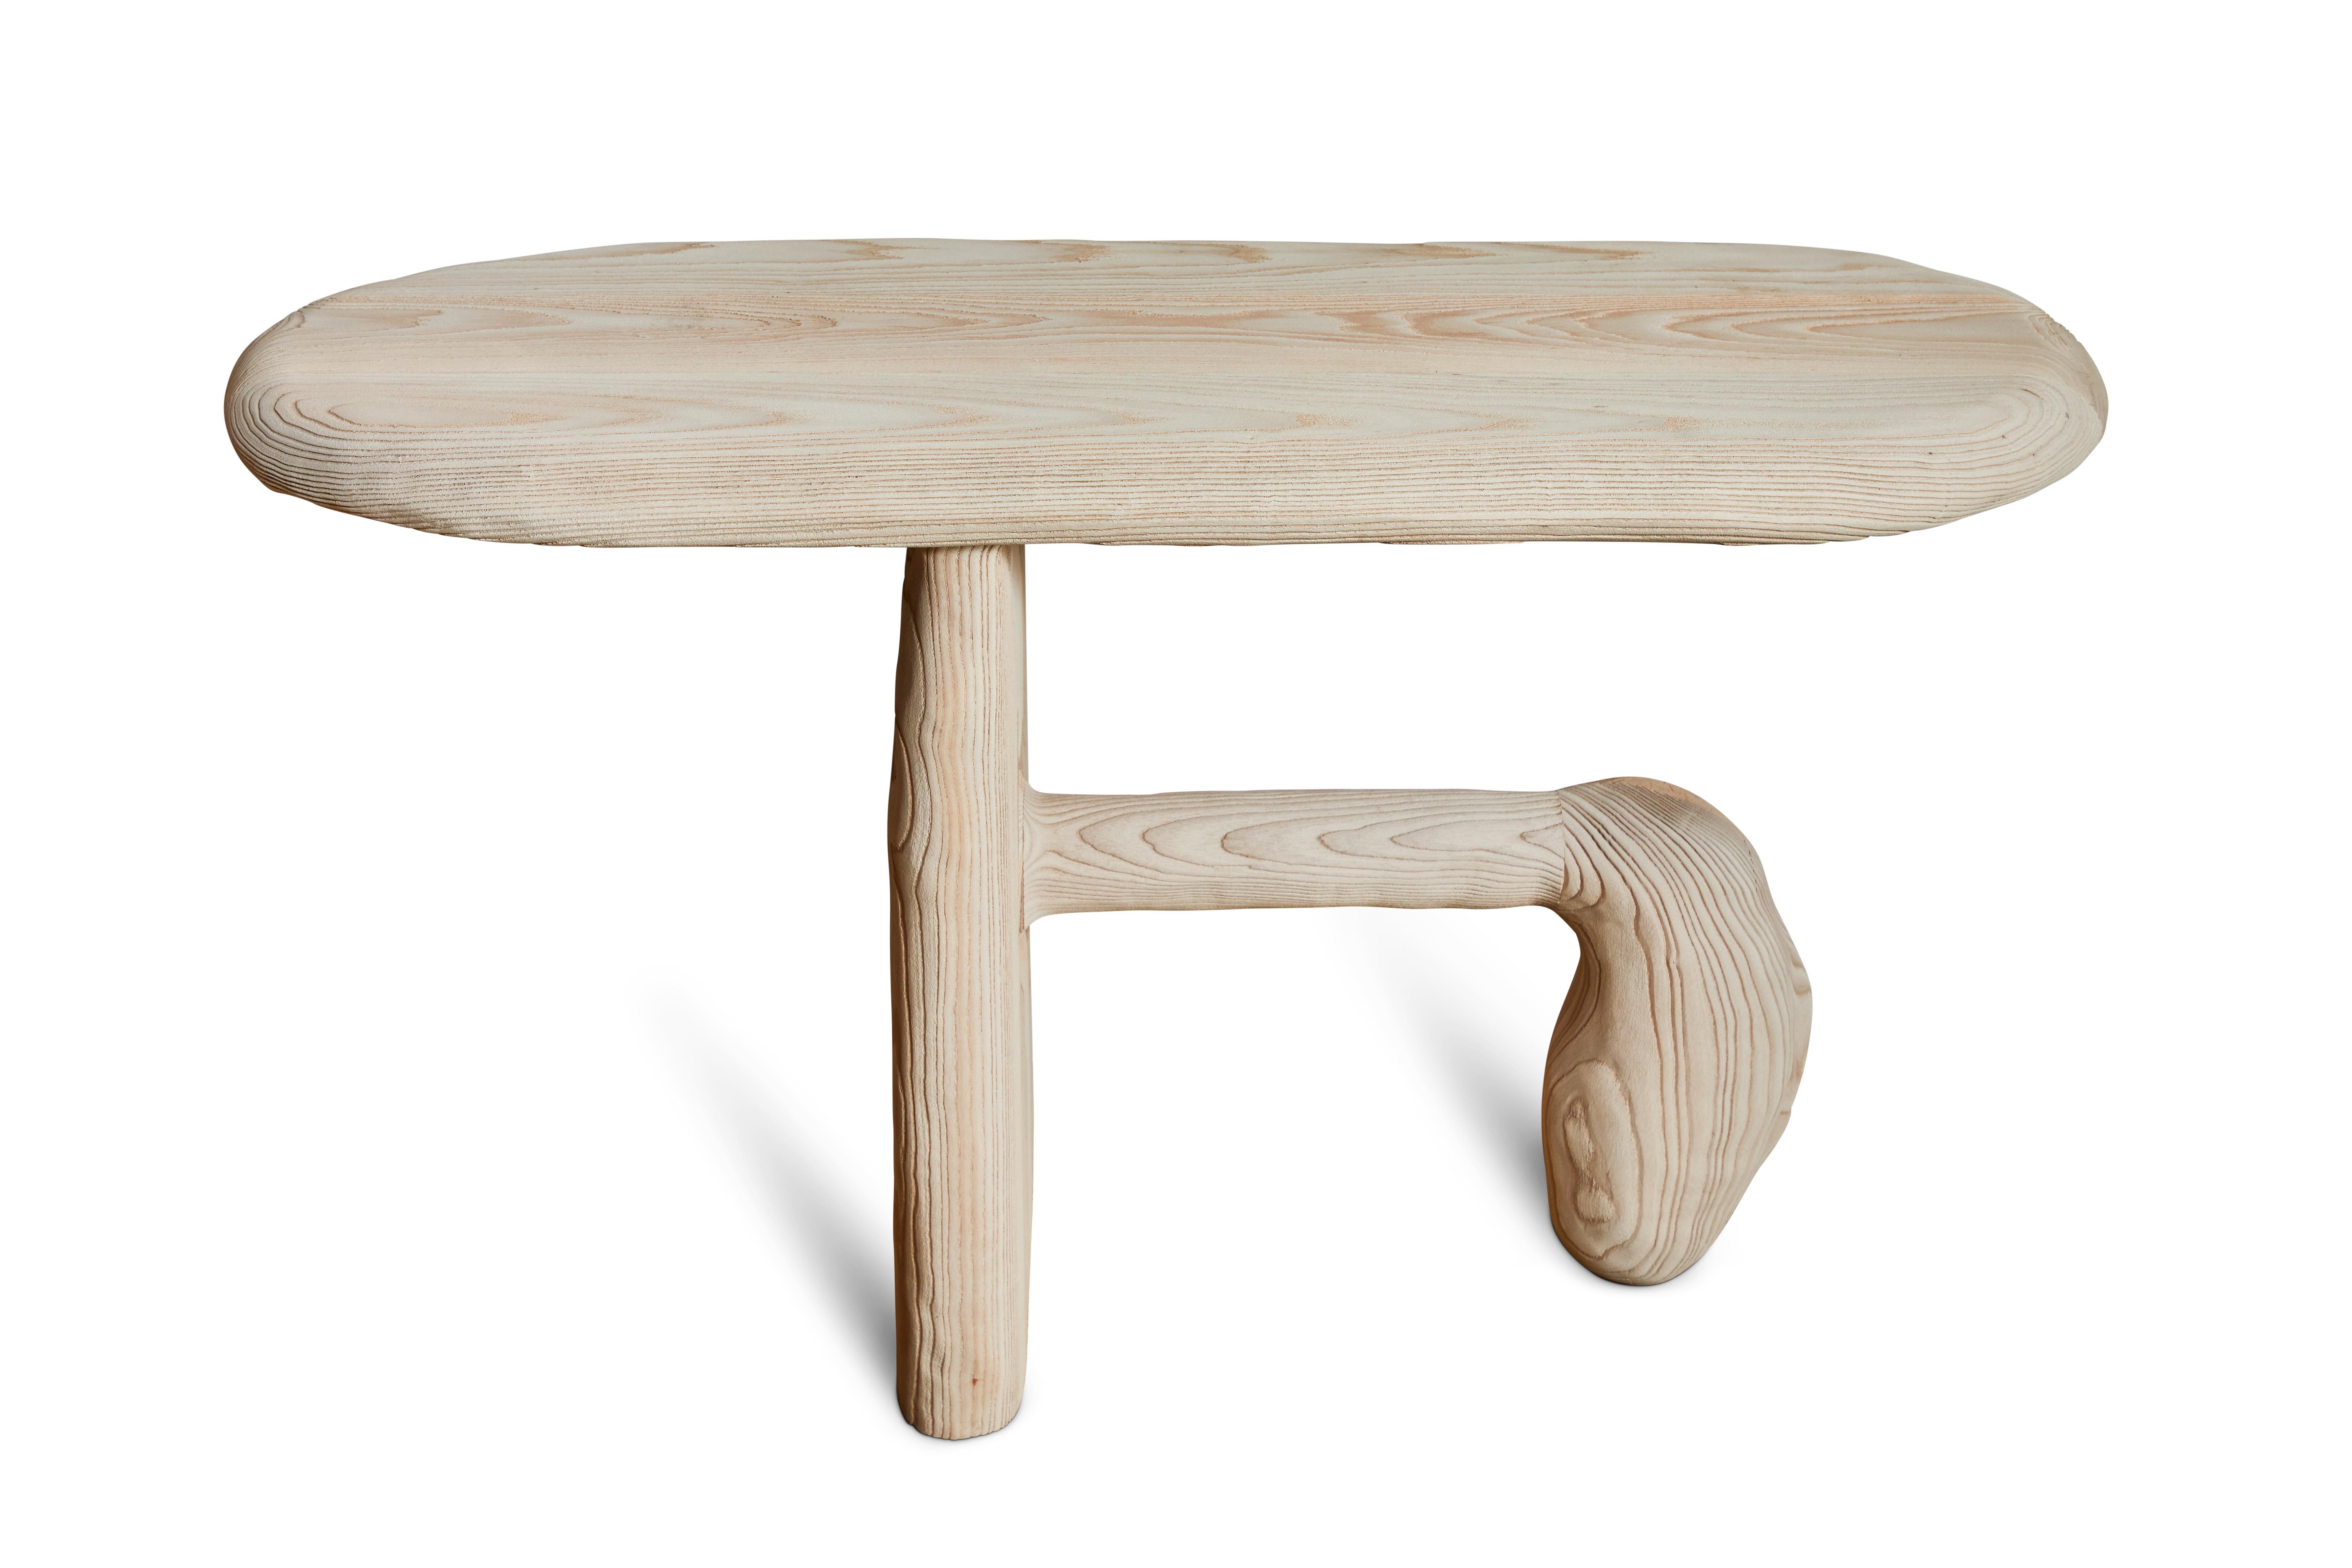 Bleached Organic Hand Carved and Textured Ash Entry Table by Casey McCafferty For Sale